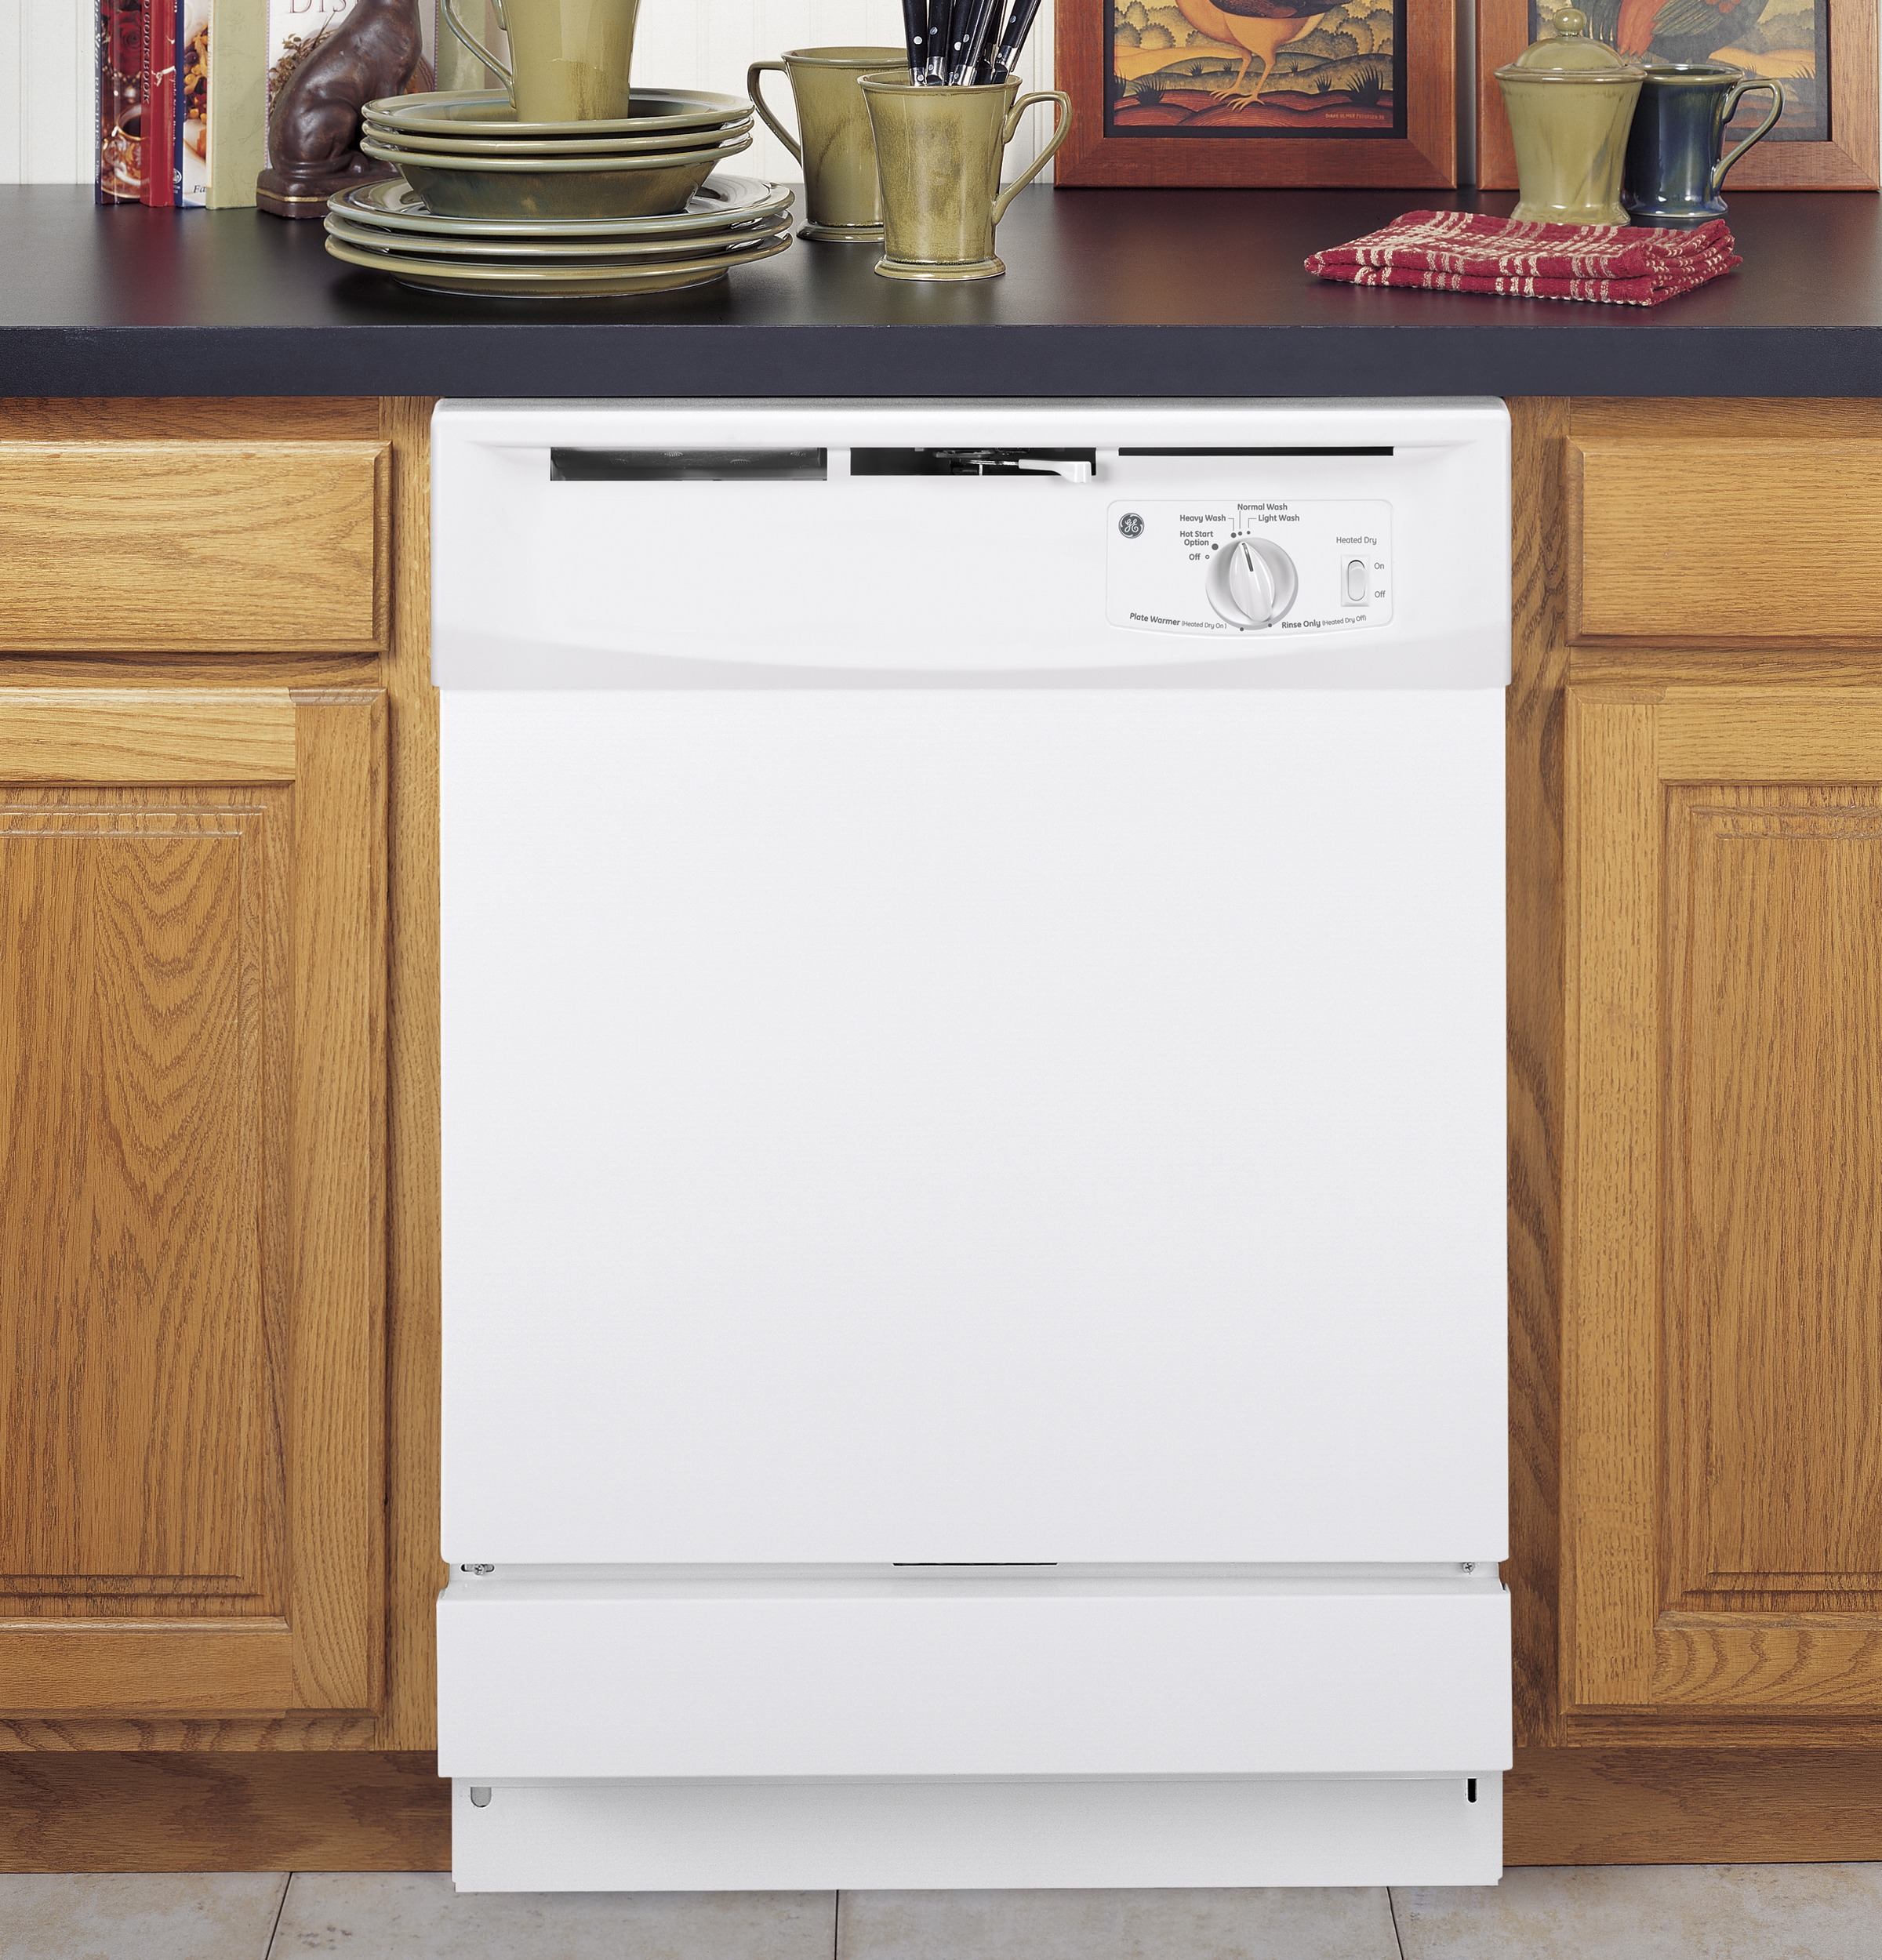 GE 24" BuiltIn Dishwasher White on White at Pacific Sales